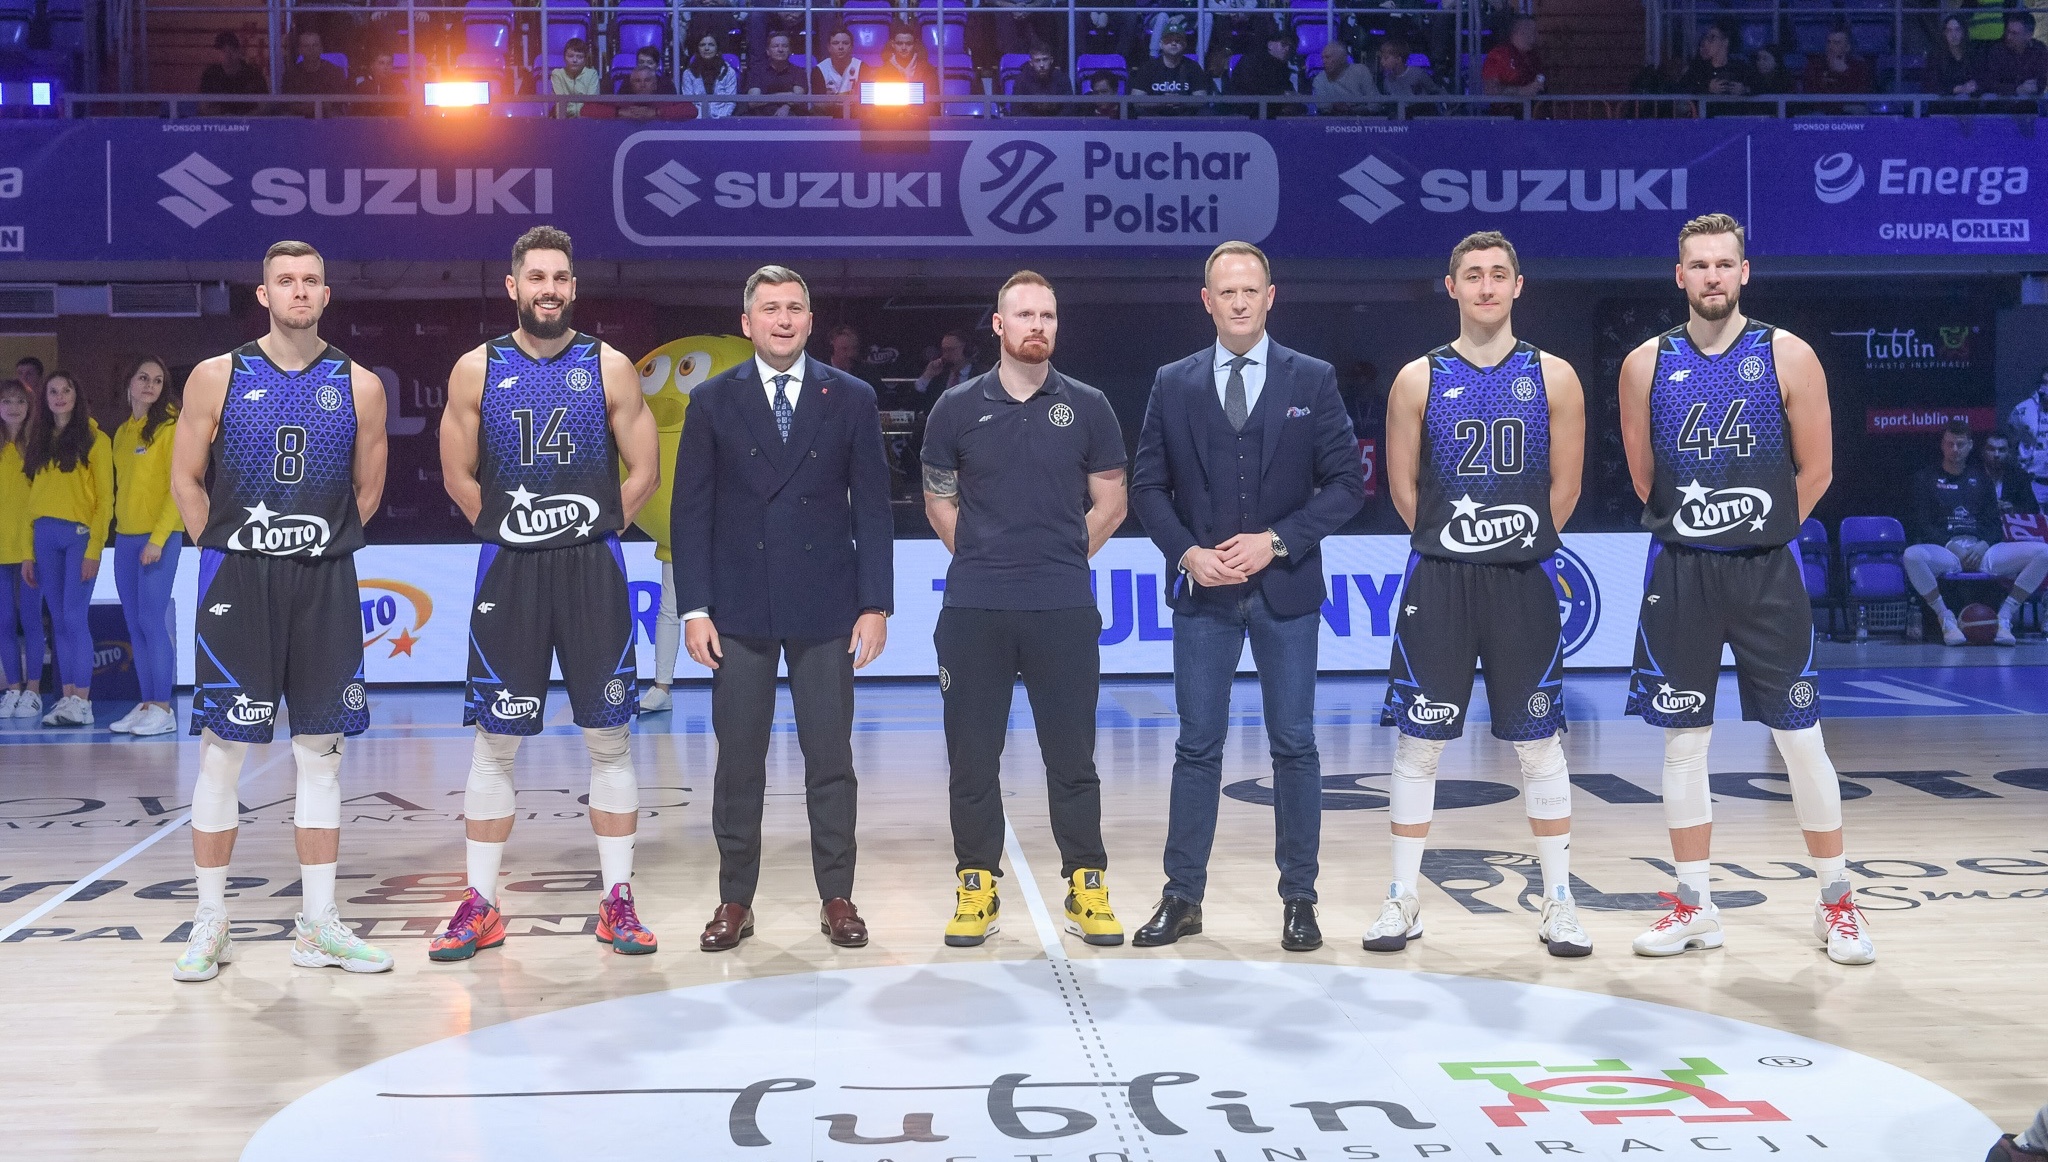 The presentation of the LOTTO 3X3 Team Basketball Team